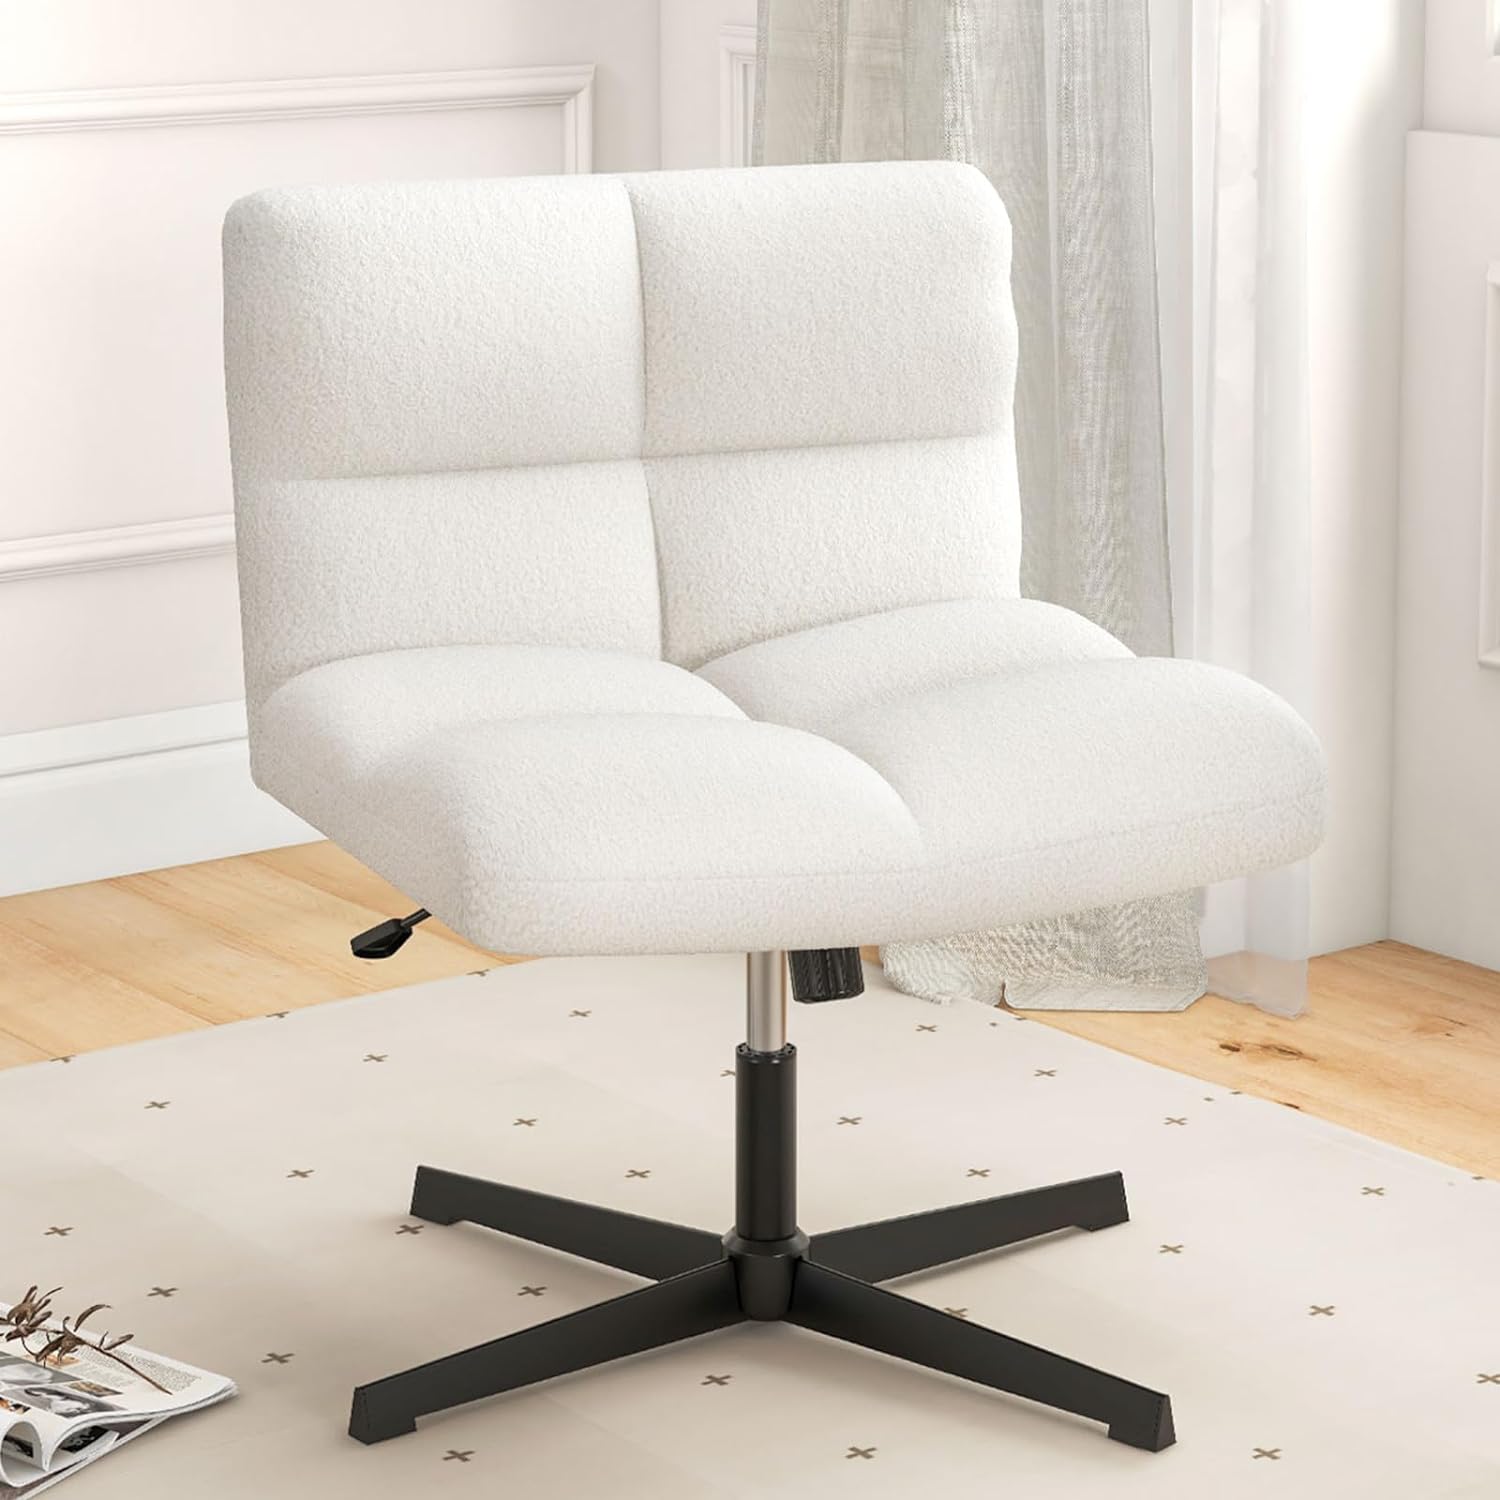 Giantex chair with crossed legs